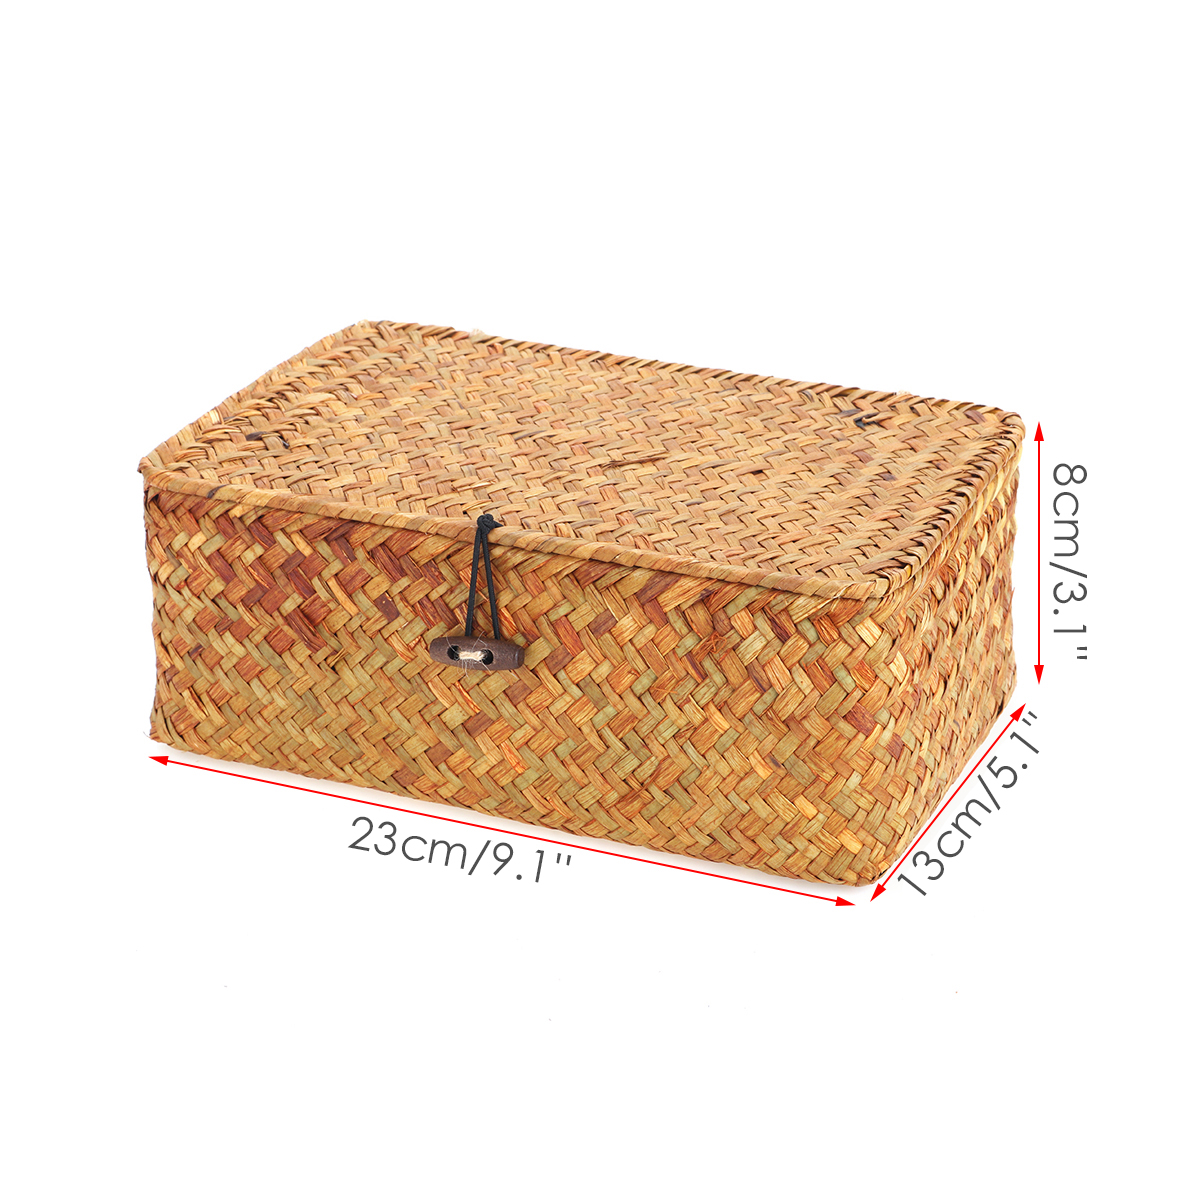 Storage-Box-Rectangular-Straw-Flower-Basket-with-Cover-Home-Garden-Fruit-Clothes-1748147-2